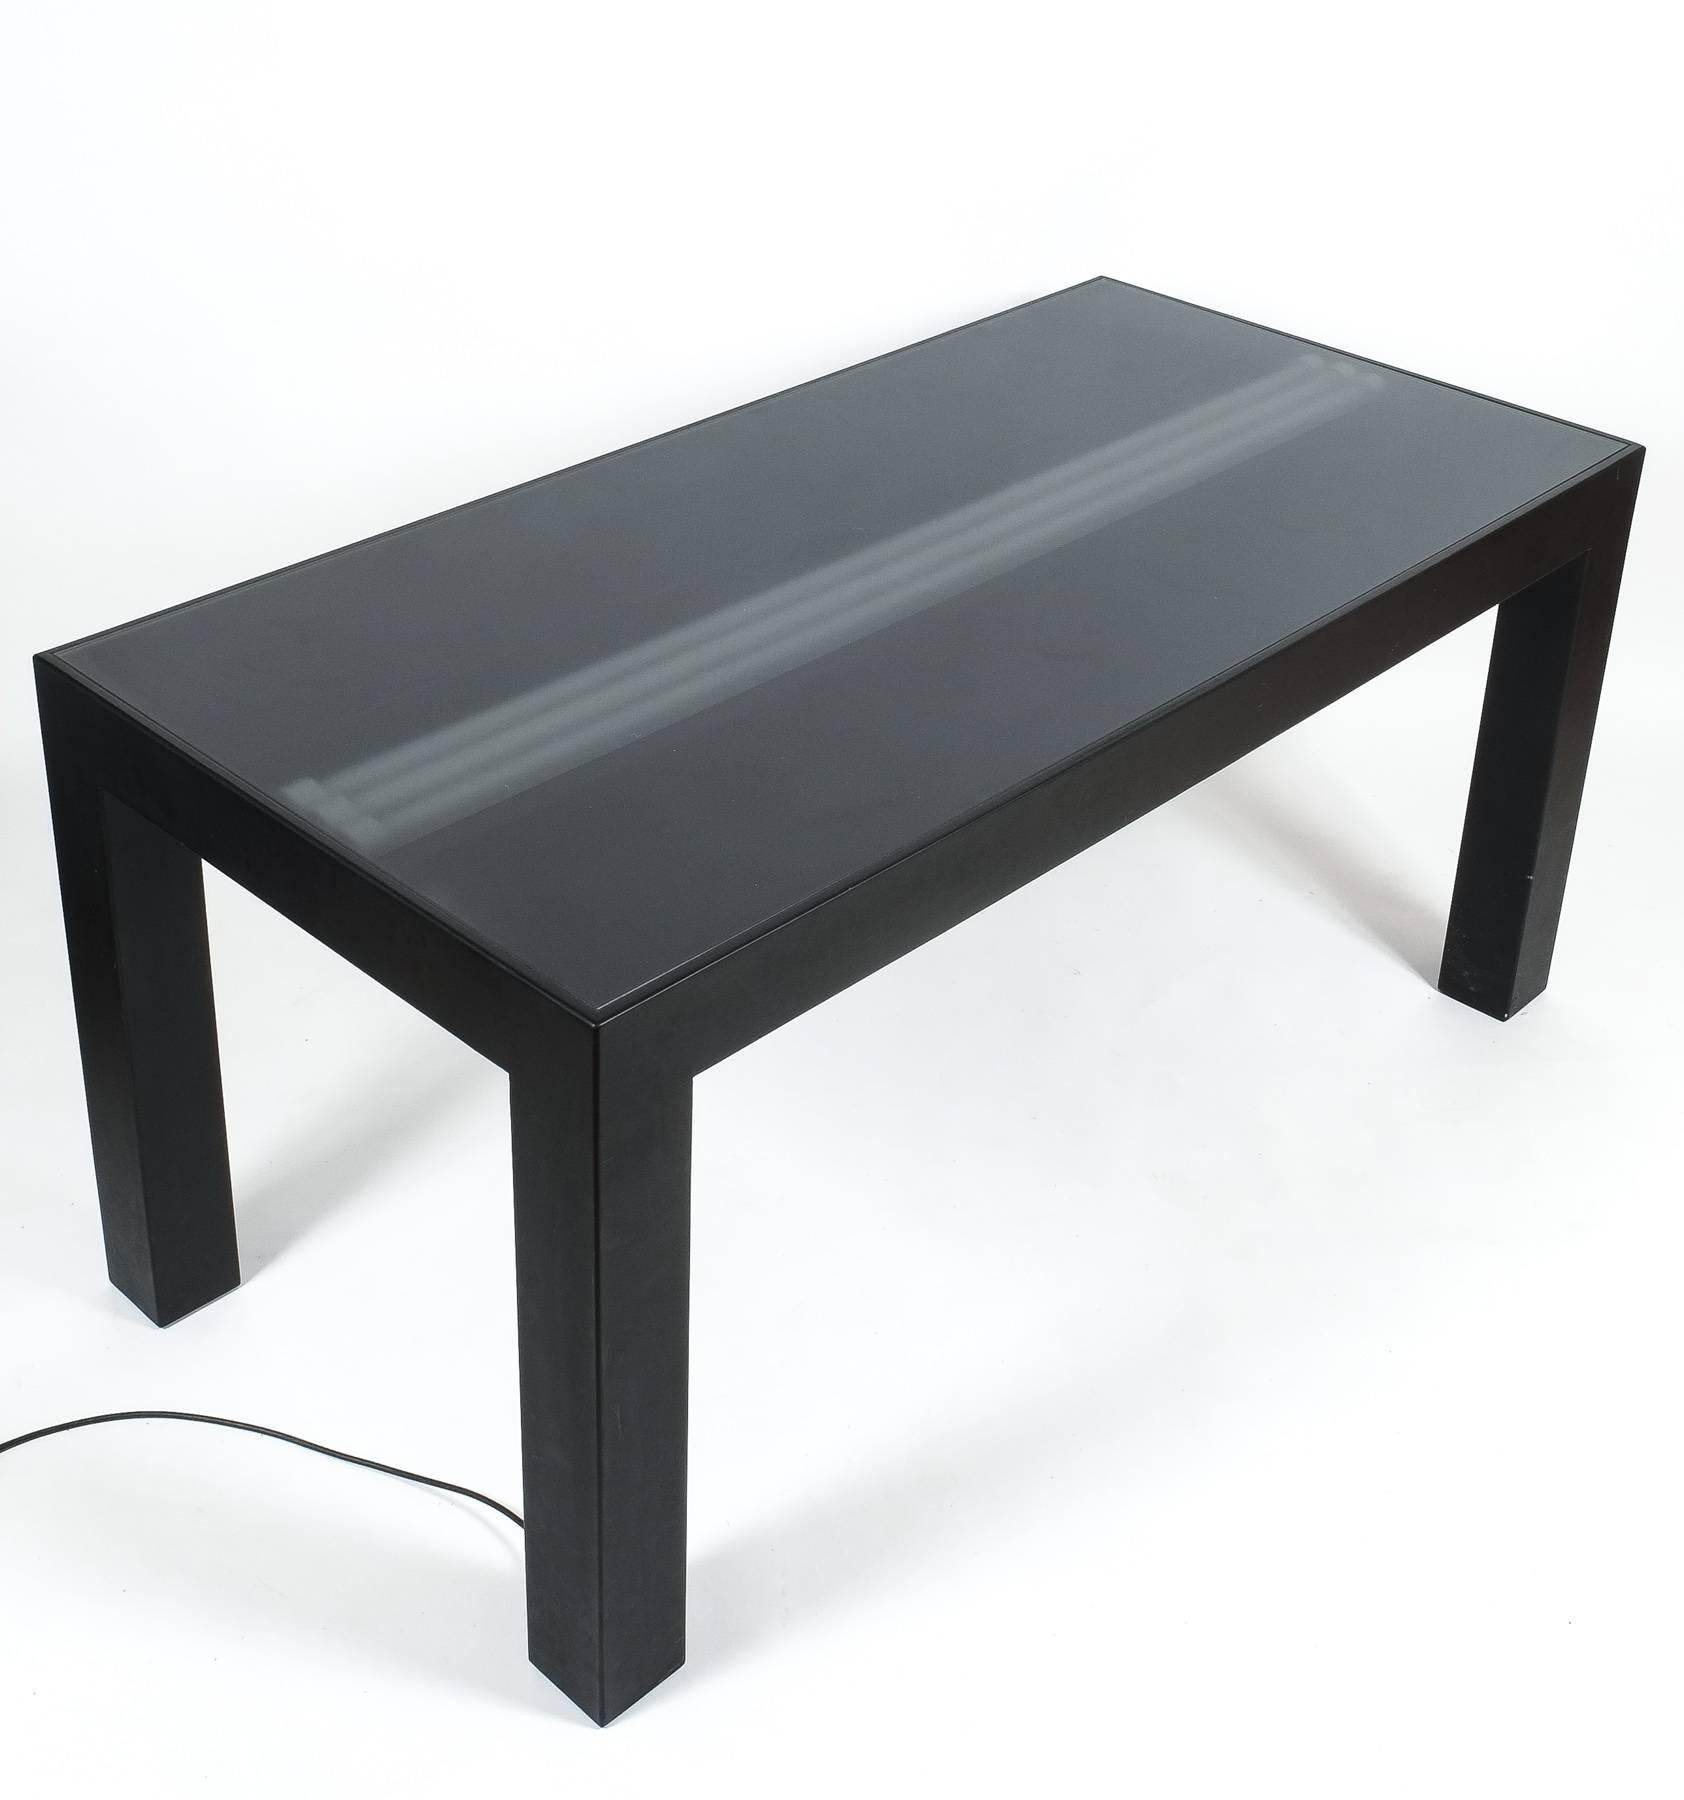 Contemporary Johanna Grawunder Illuminated Dining Table by  for Post-Design, 2001 For Sale